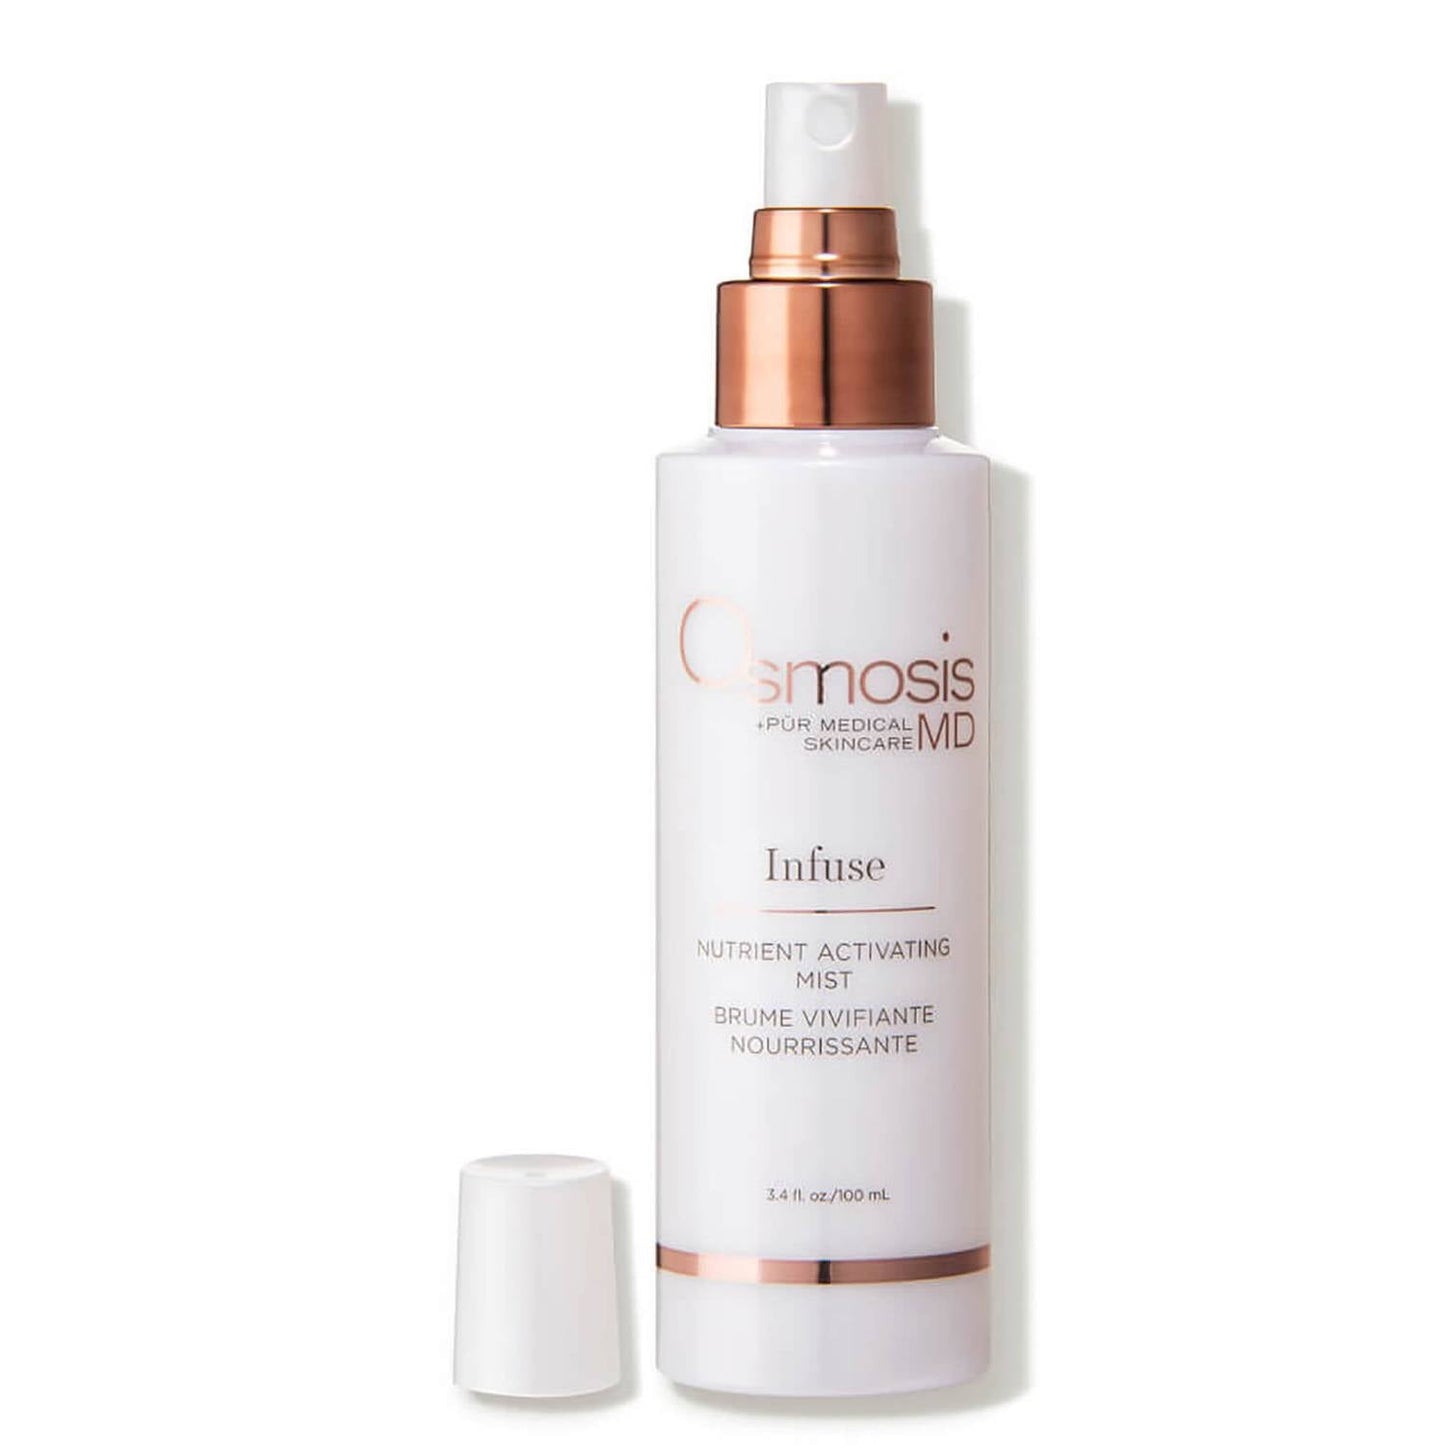 Infuse Nutrient Activating Mist - Pearl Skin Studio